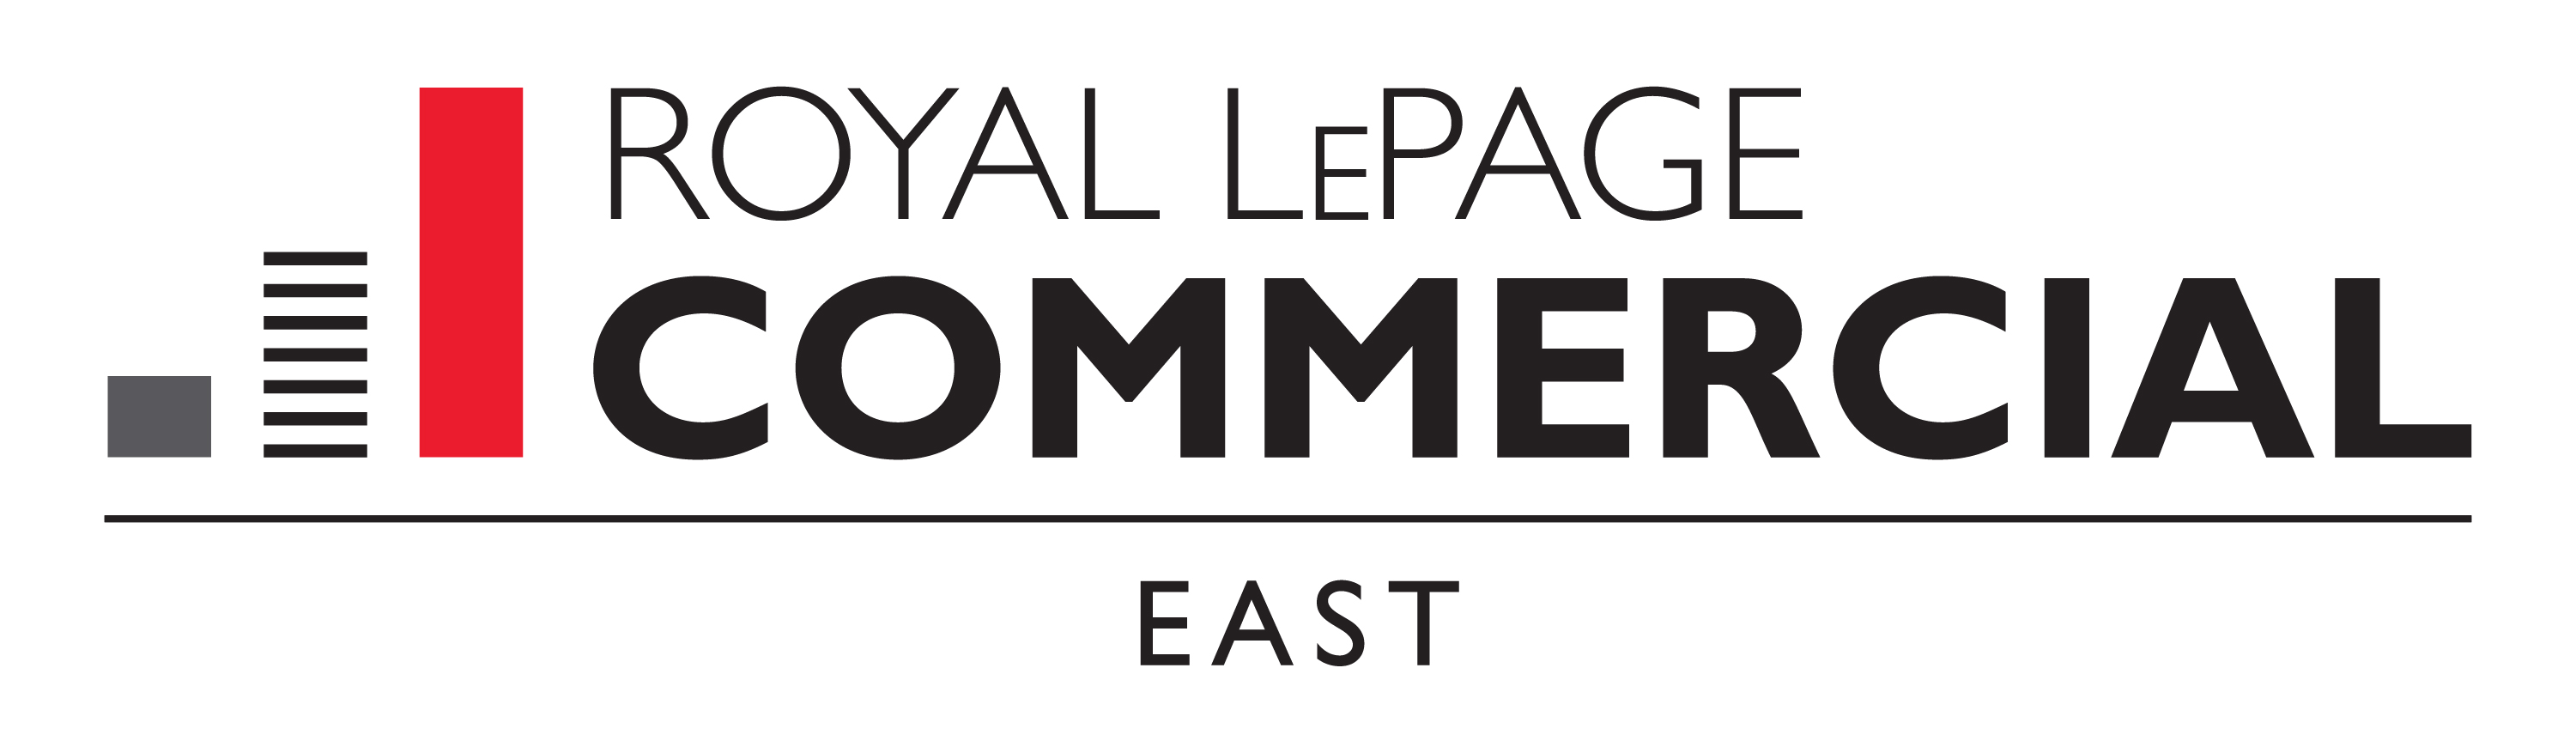 Royal LePage Commercial East - 102-7071 BAYERS ROAD, HALIFAX, NS, B3L 2C2